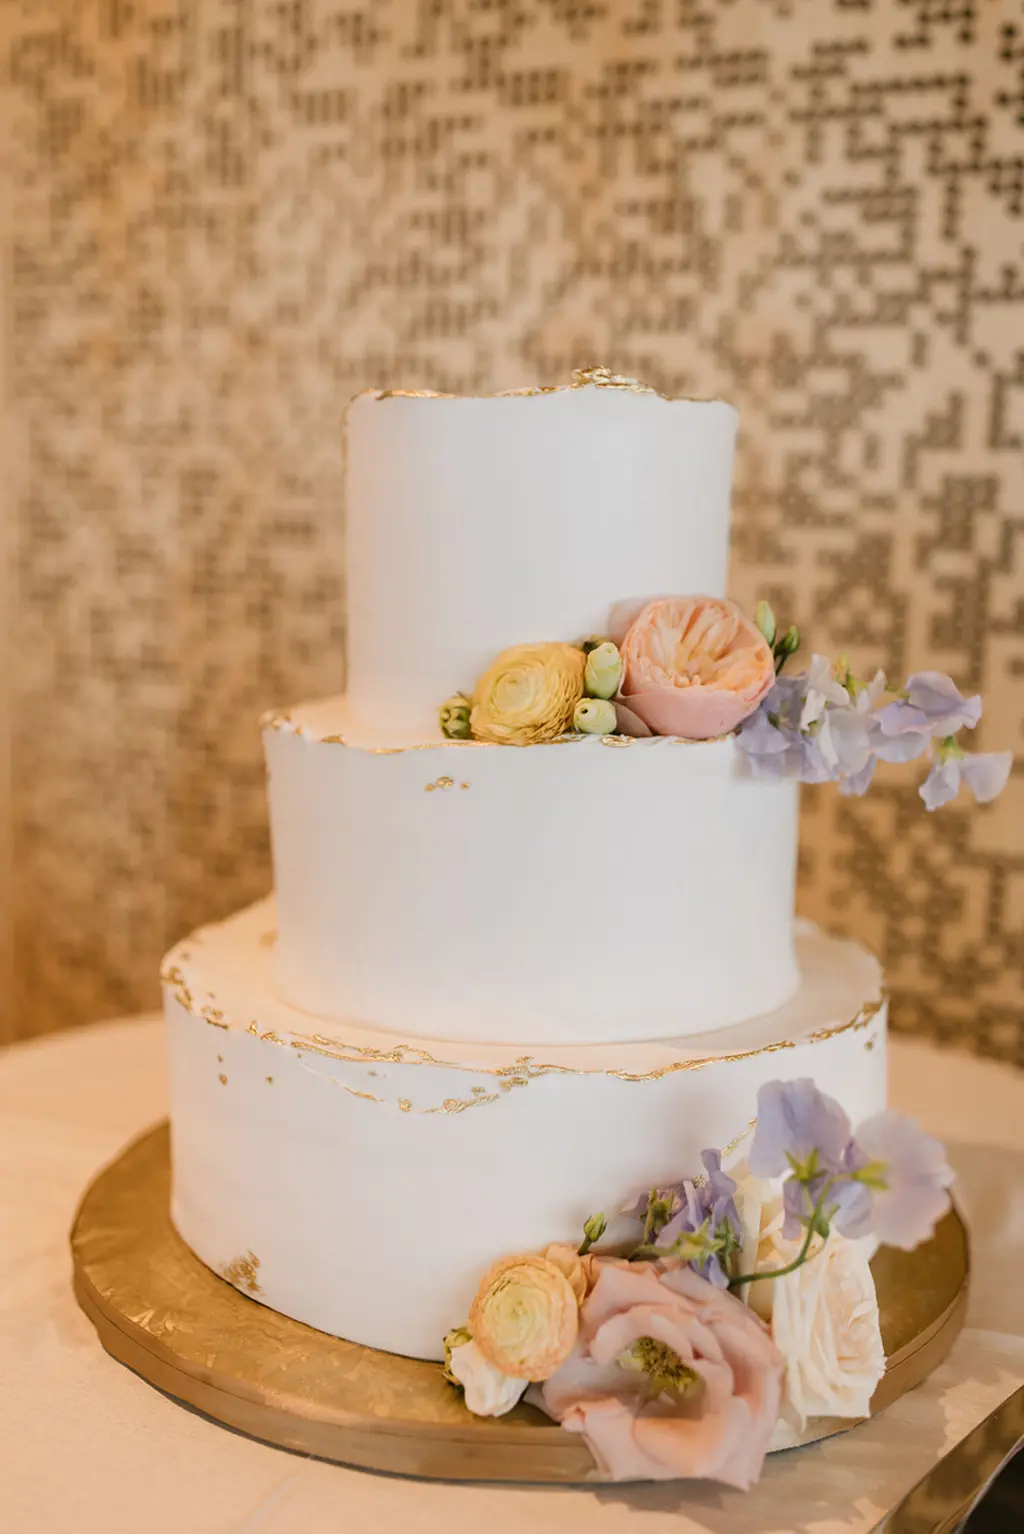 Three Tiered Round White Wedding Cake with Gold Deckle Edge and Pastel Pink, Blue, and Yellow Flower Accents